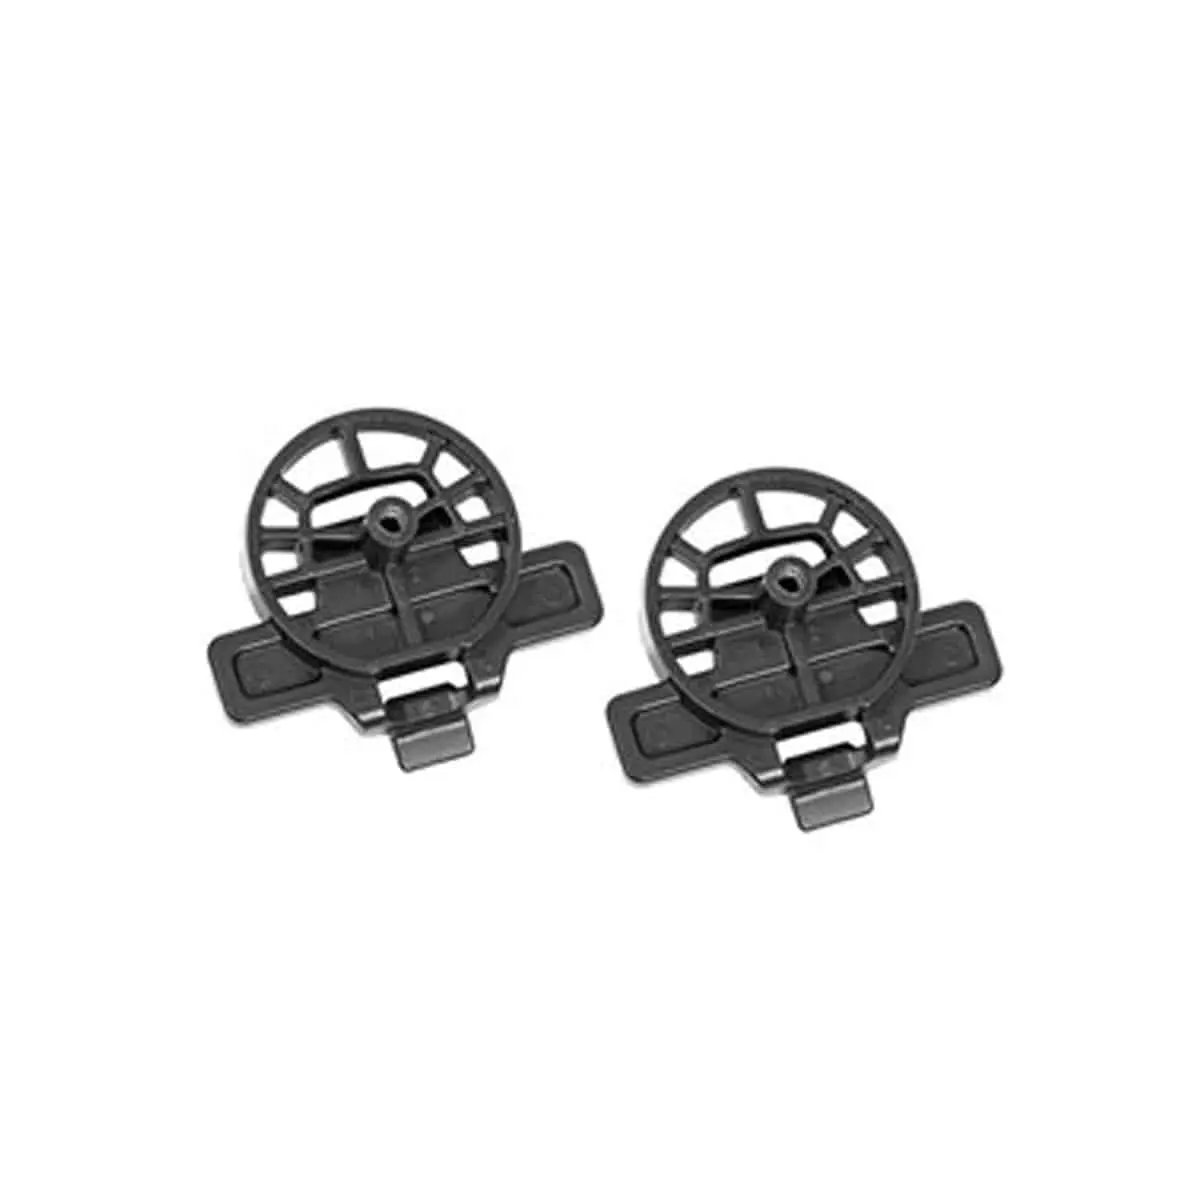 exfil peltor quick release adapter back plates 3